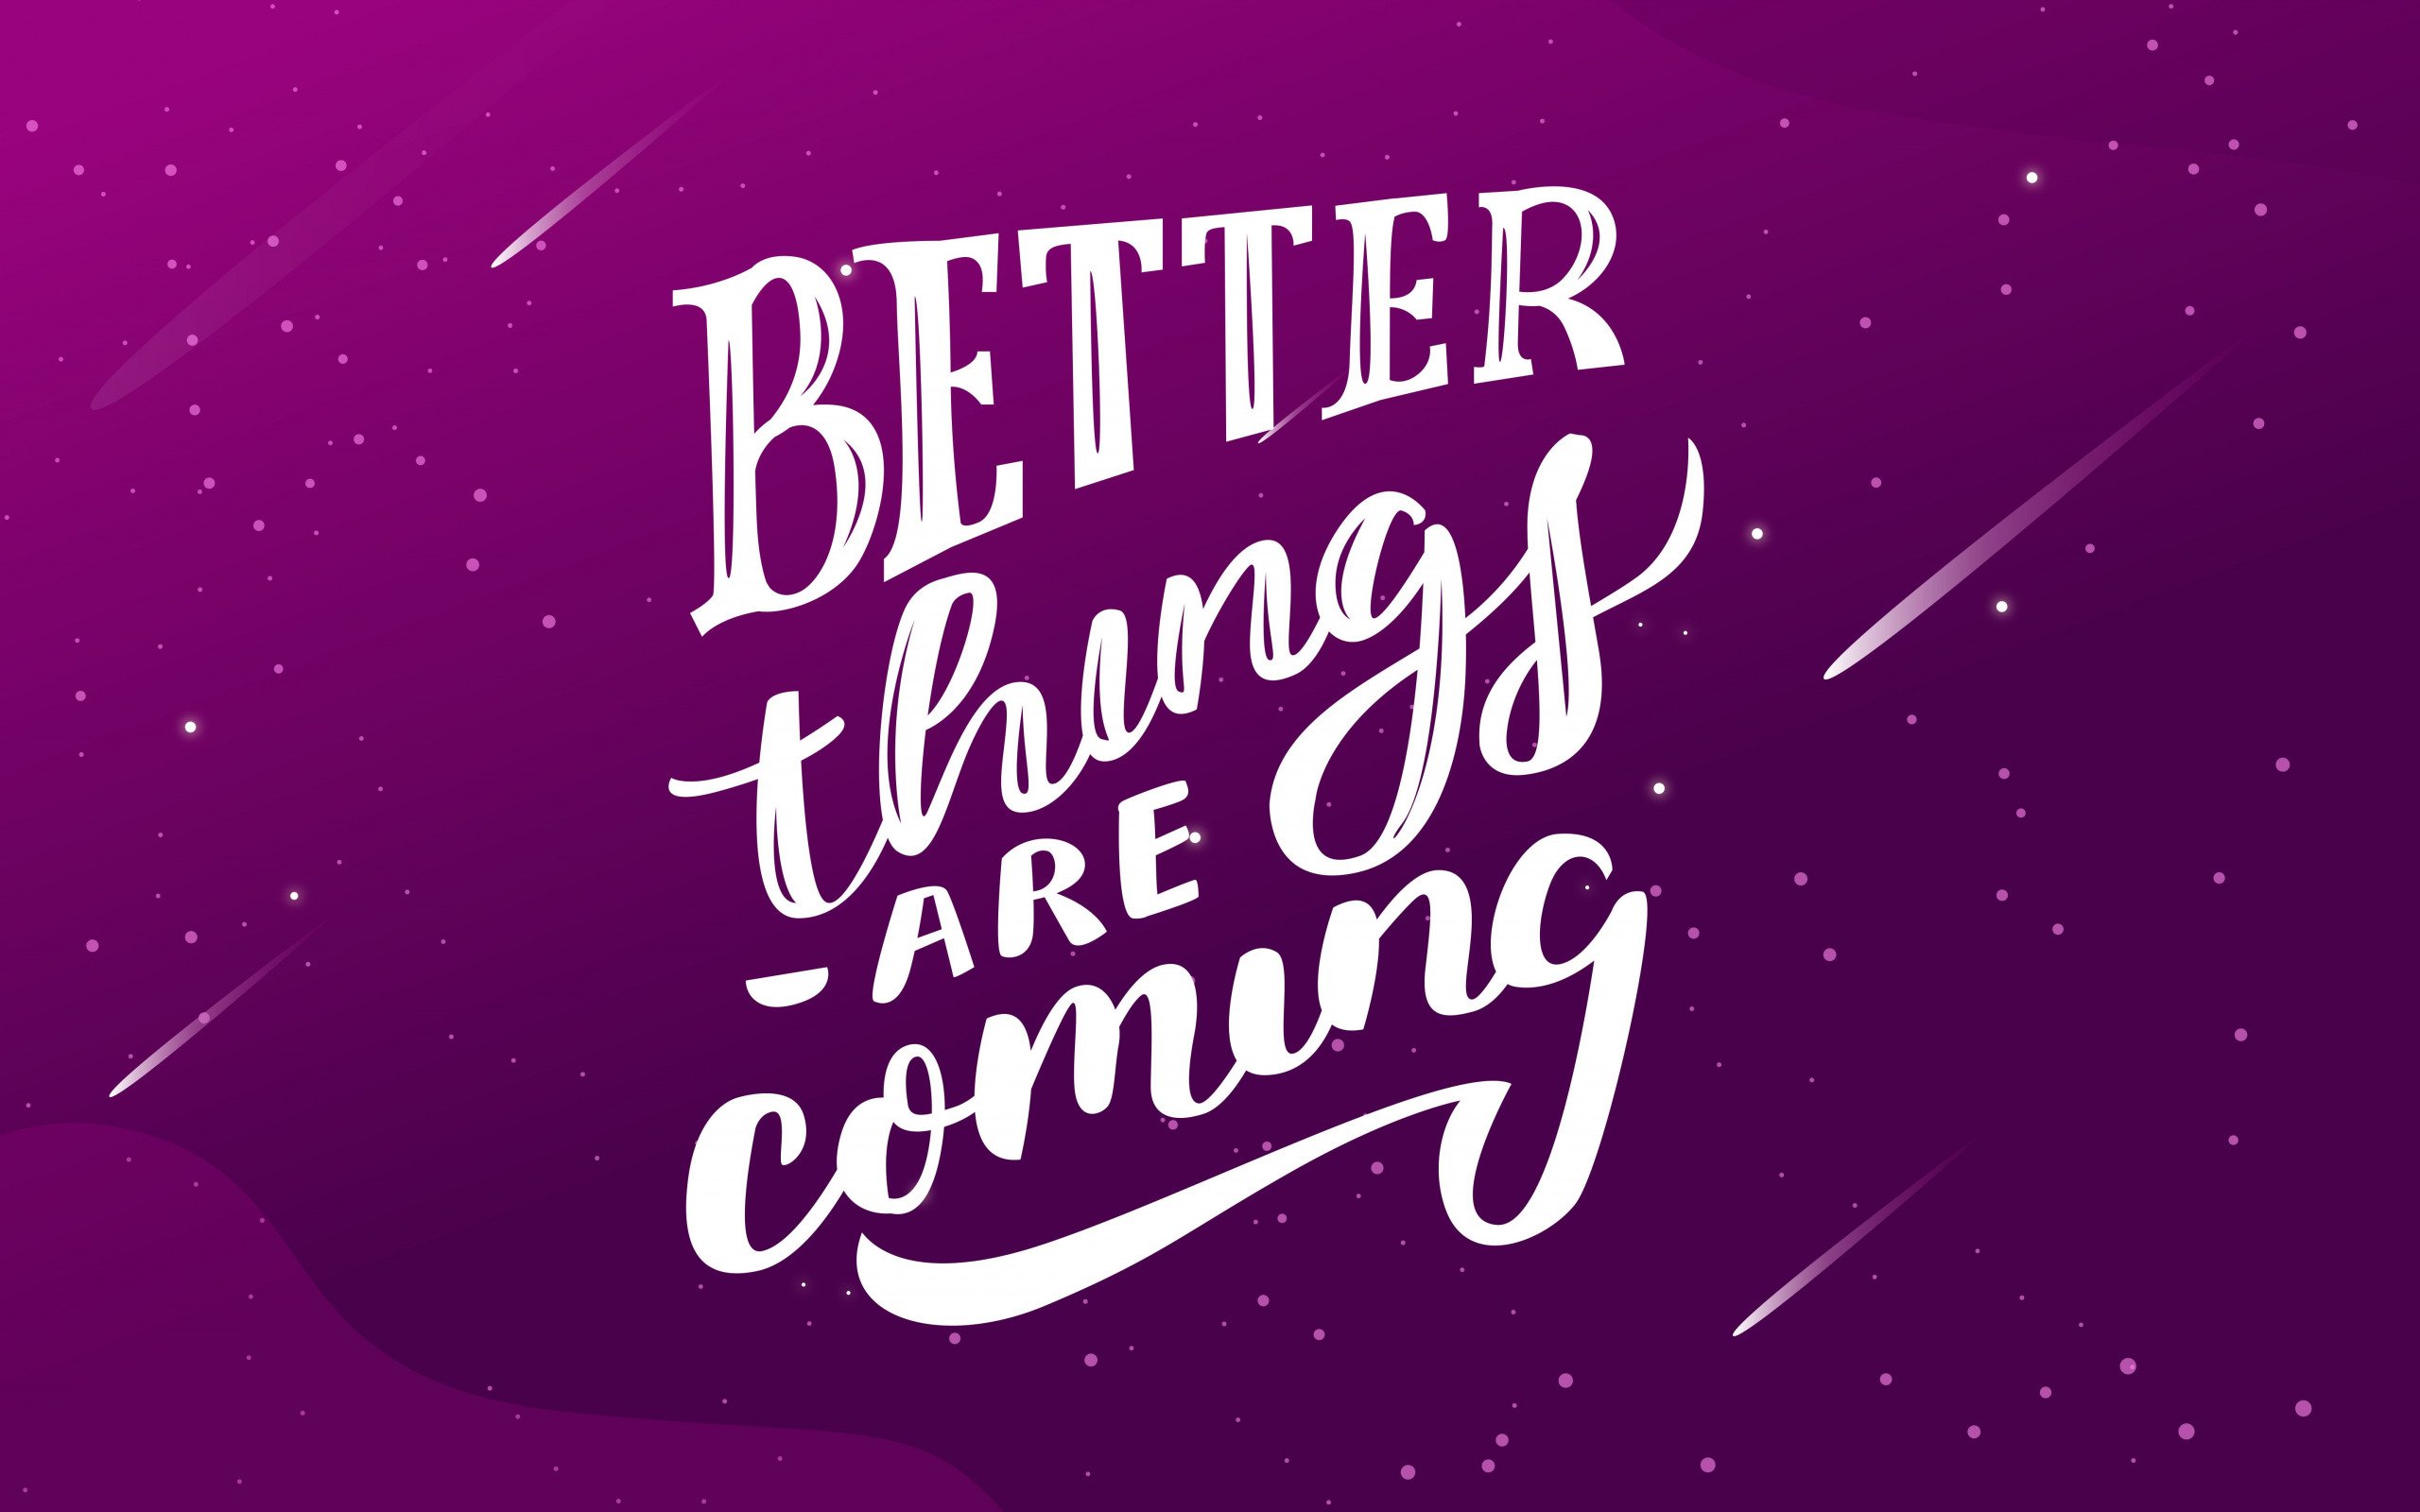 Download wallpaper Better things are coming, quote, motivation, inspiration, creative art for desktop with resolution 2560x1600. High Quality HD picture wallpaper